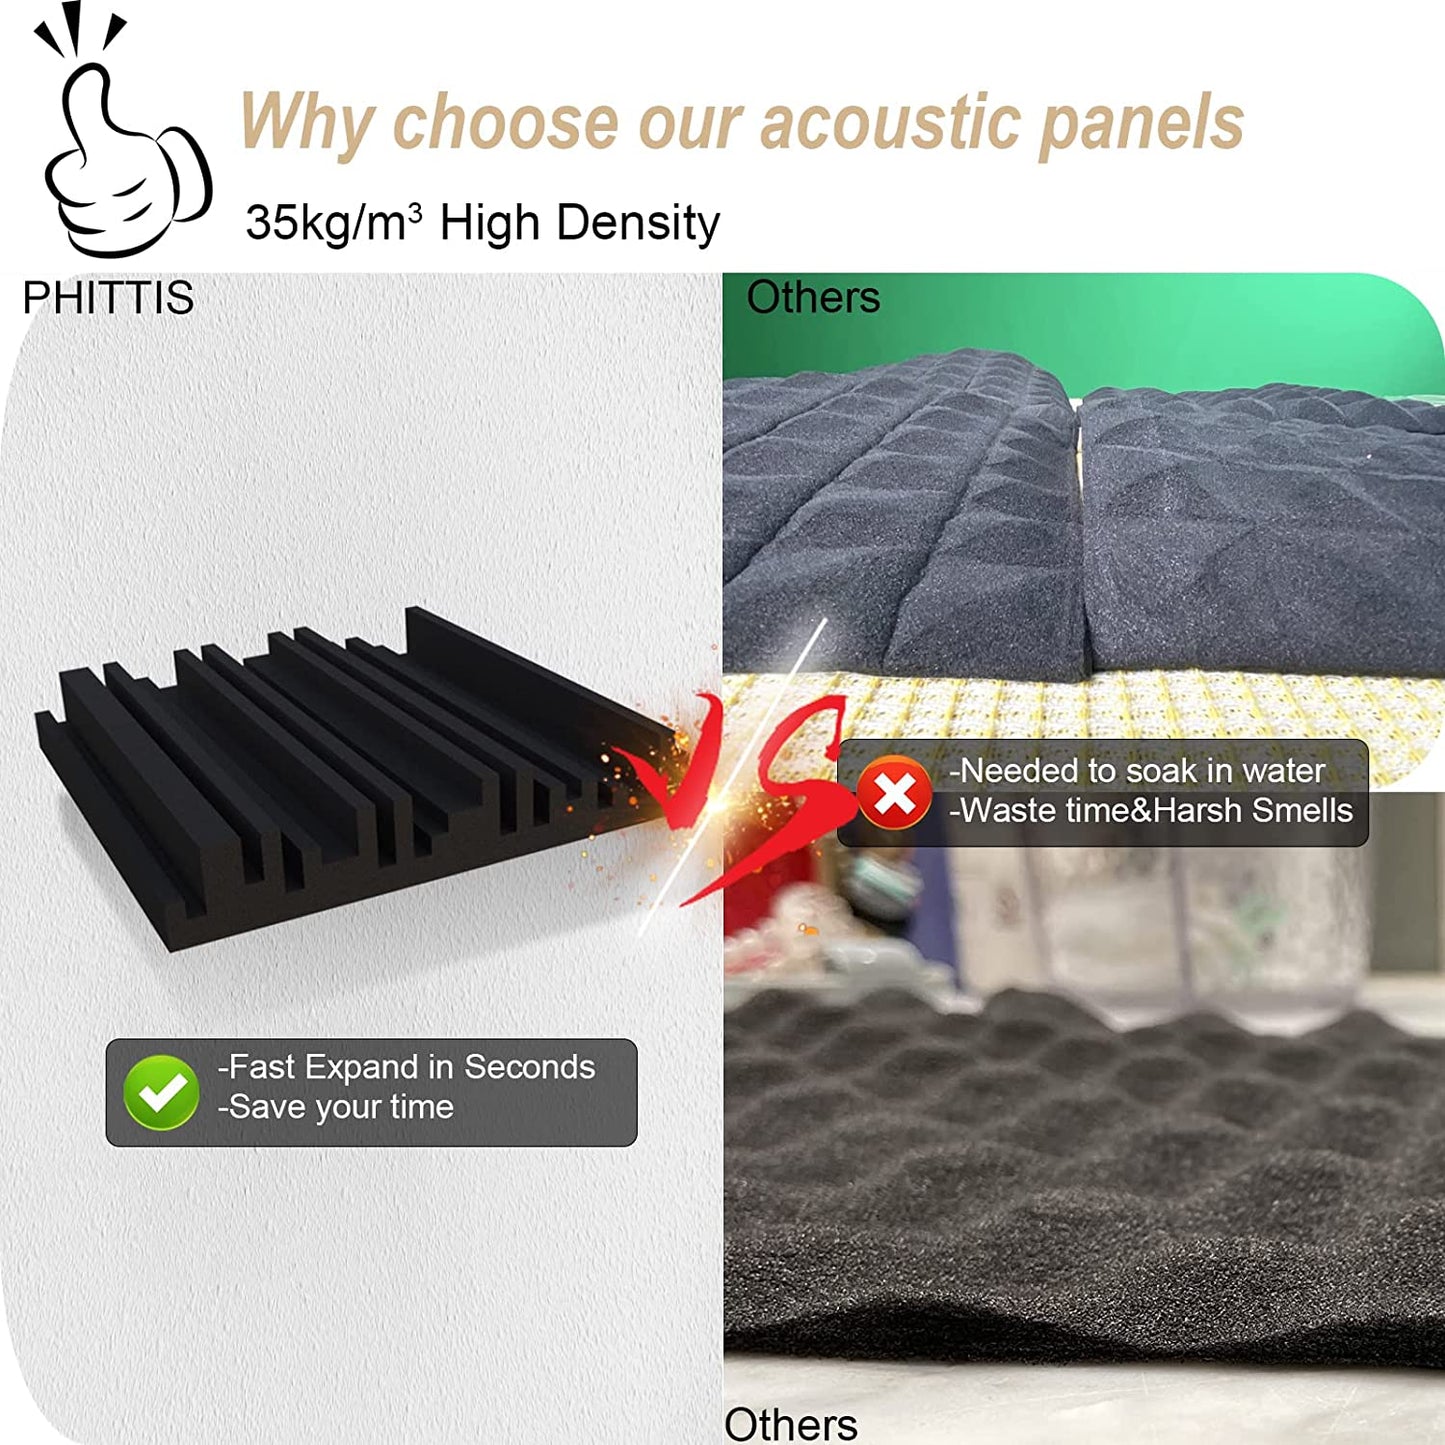 12-Pack High Density Soundproof Foam Panels for Walls and Ceilings, 12" x 12" x 2", Upgraded Multi Groove Design, Quick Recovery Sound Absorbing Technology, Black